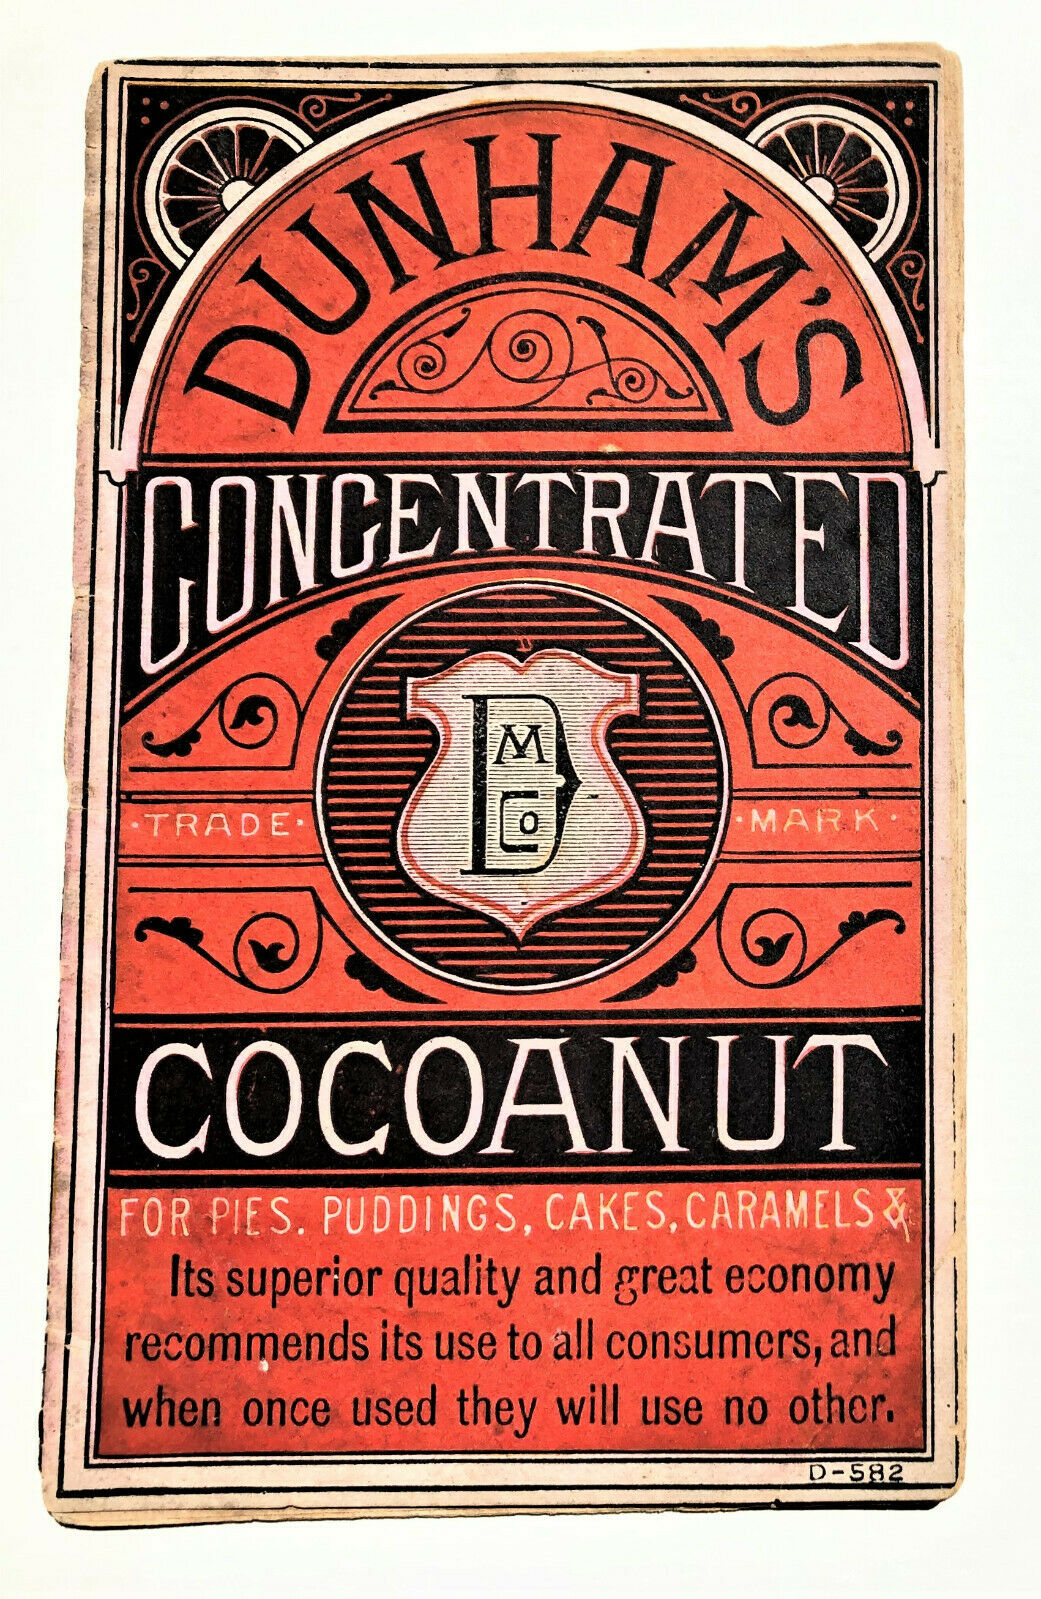 Dunham's Concentrated Cocoanut For Pies, Puddings, Cakes, Caramels – Circa 1879